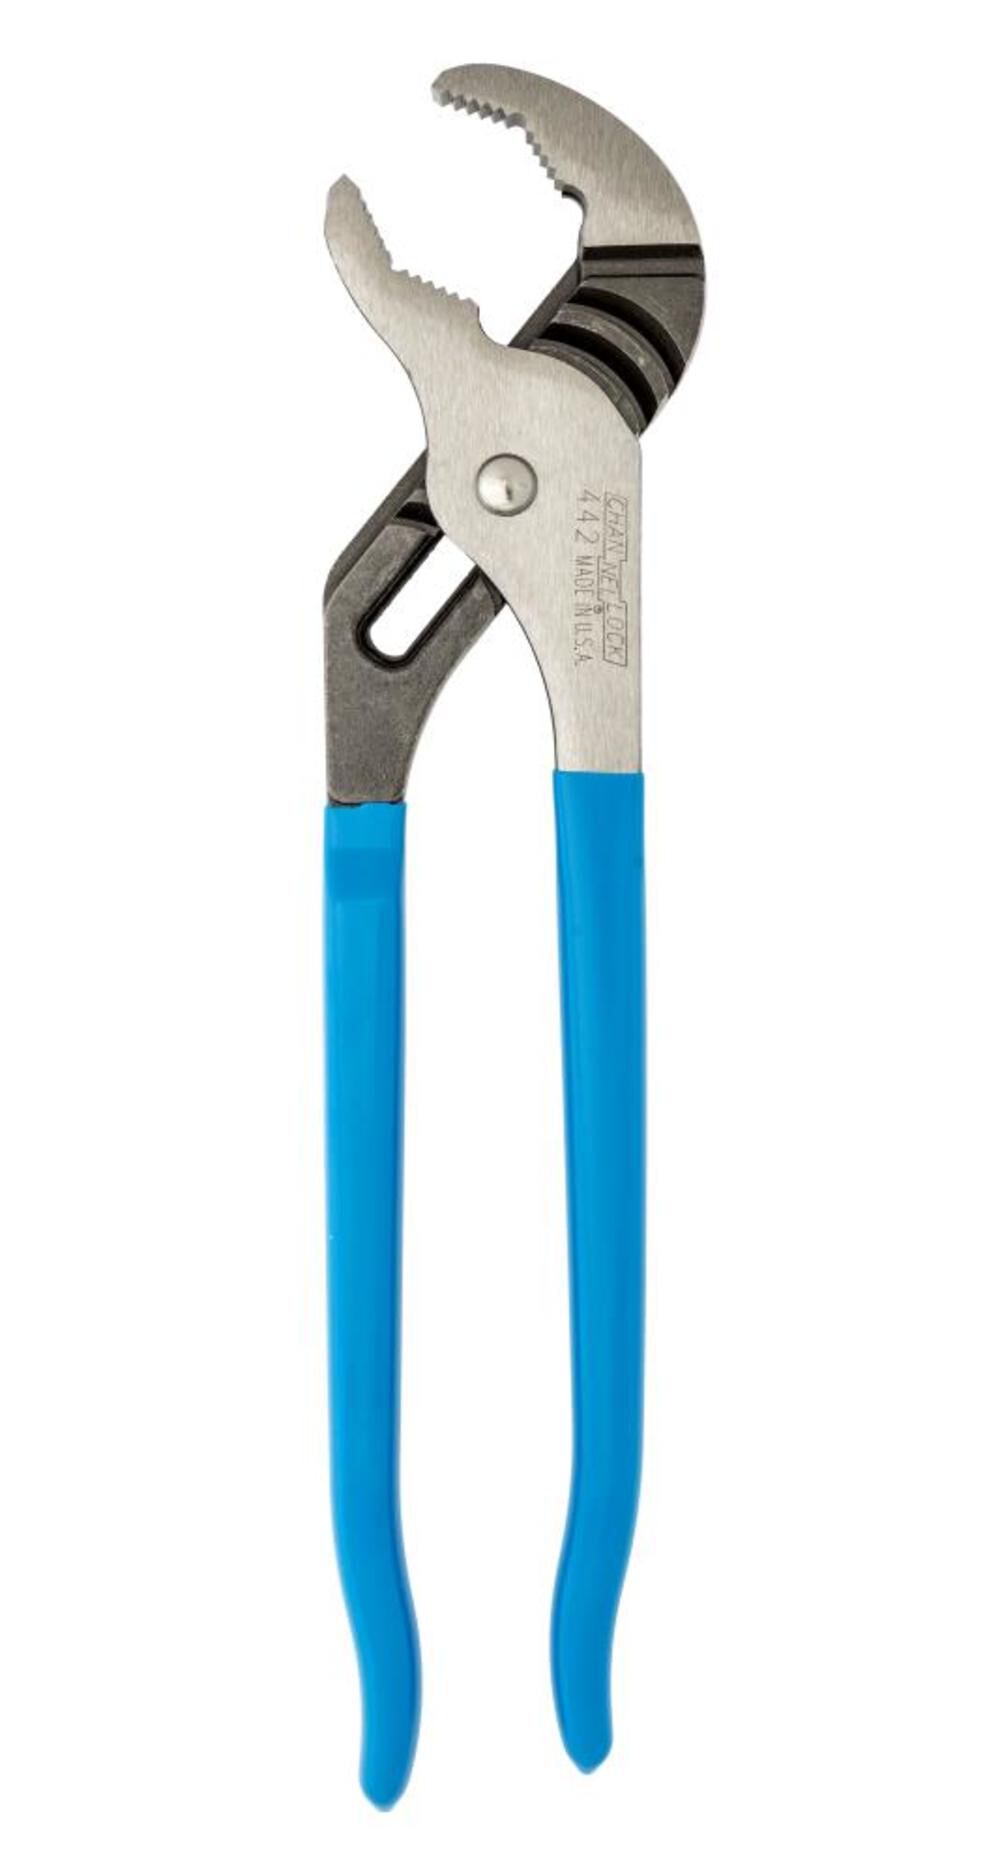 12 In. V-jaw Tongue & Groove Plier 442